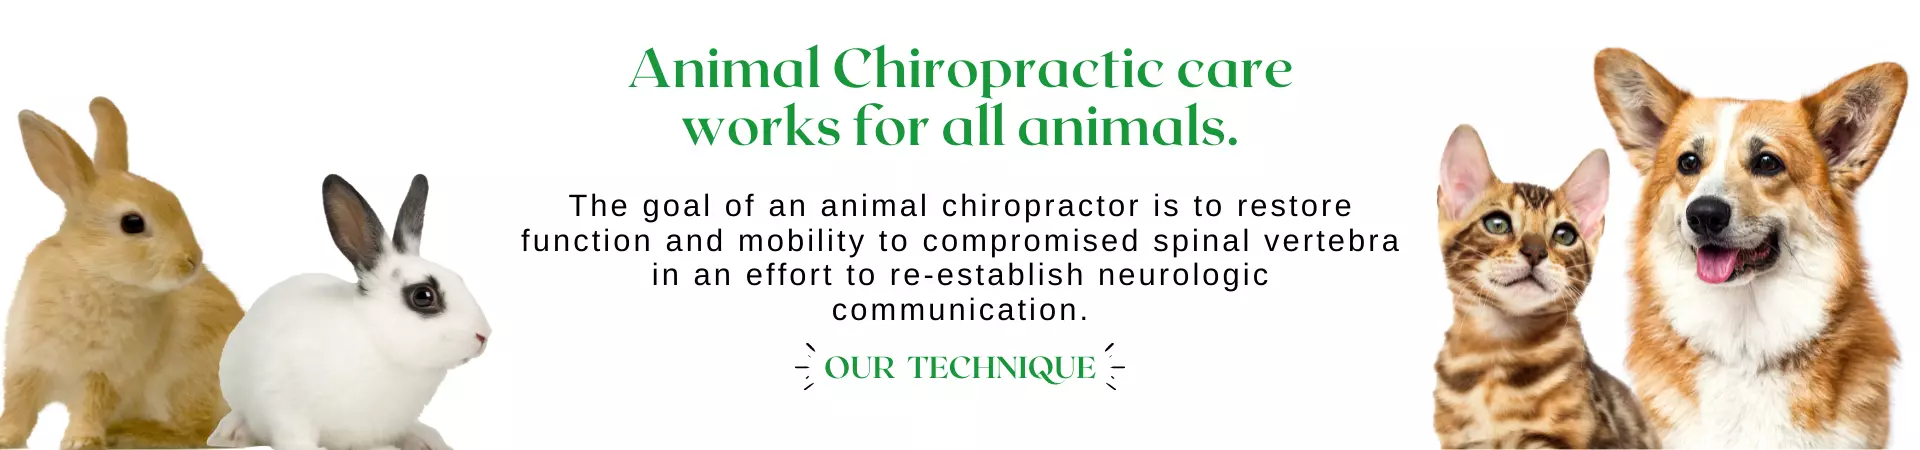 Animal Chiropractic care works for all animals